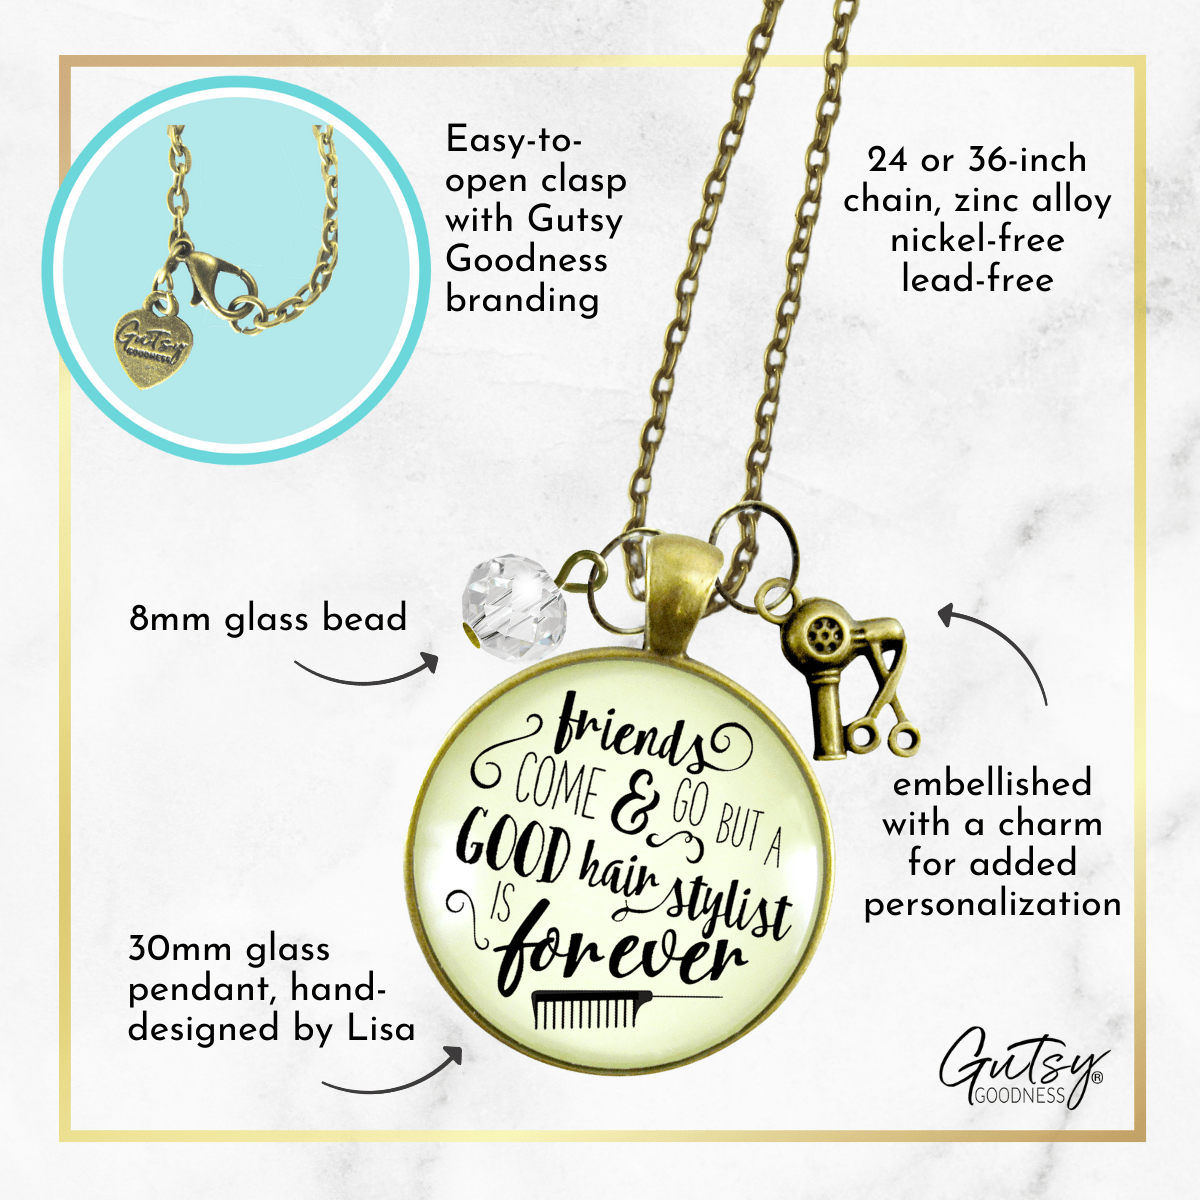 Gutsy Goodness Hair Stylist Necklace Friends Forever Beautician Quote Jewelry - Gutsy Goodness Handmade Jewelry;Hair Stylist Necklace Friends Forever Beautician Quote Jewelry - Gutsy Goodness Handmade Jewelry Gifts